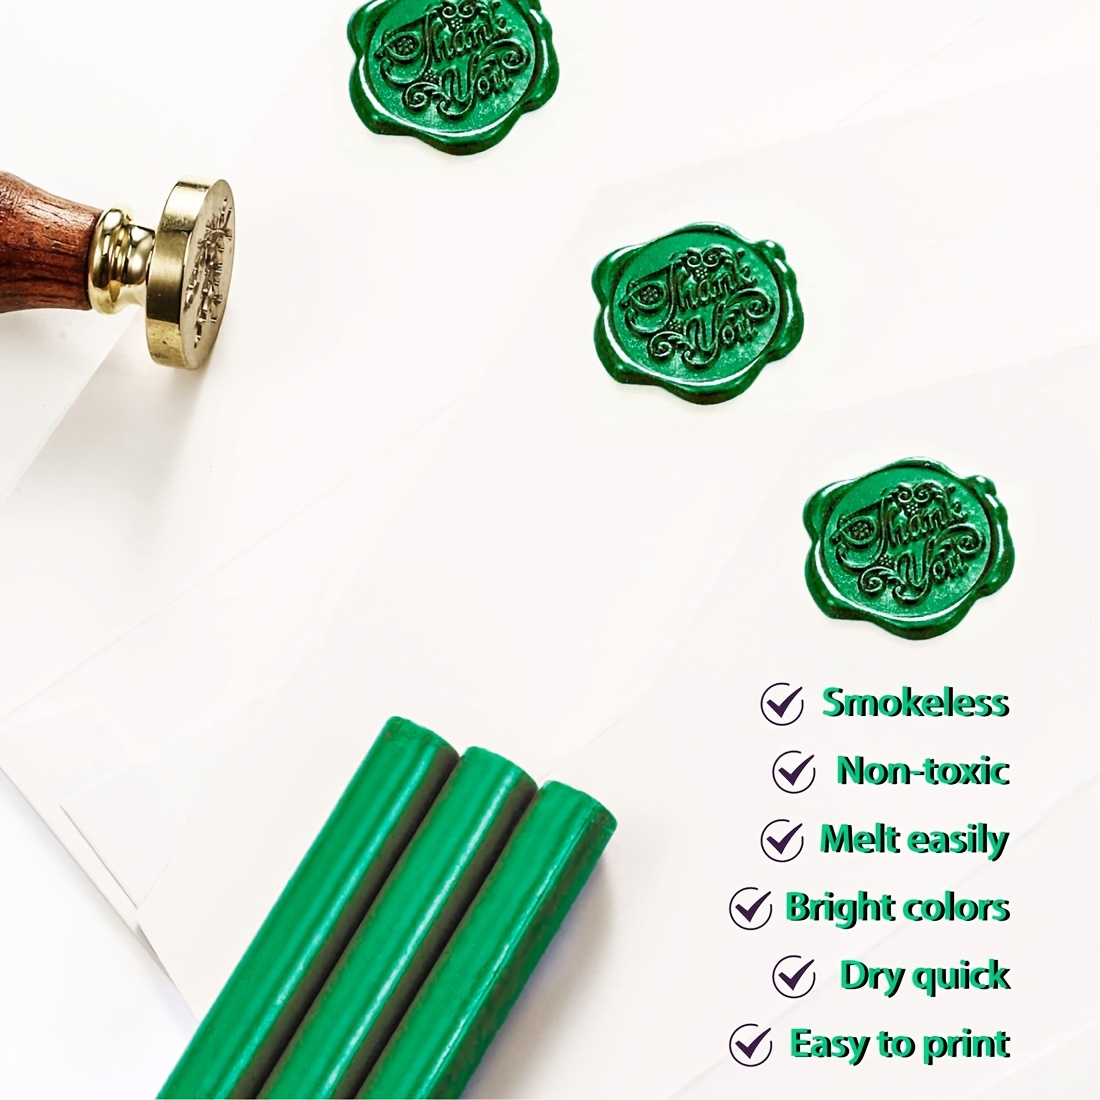 10pcs Sealing Wax Sticks Multicolor Small Round Stamp Tools For Diy  Invitations Cards Envelopespine Green